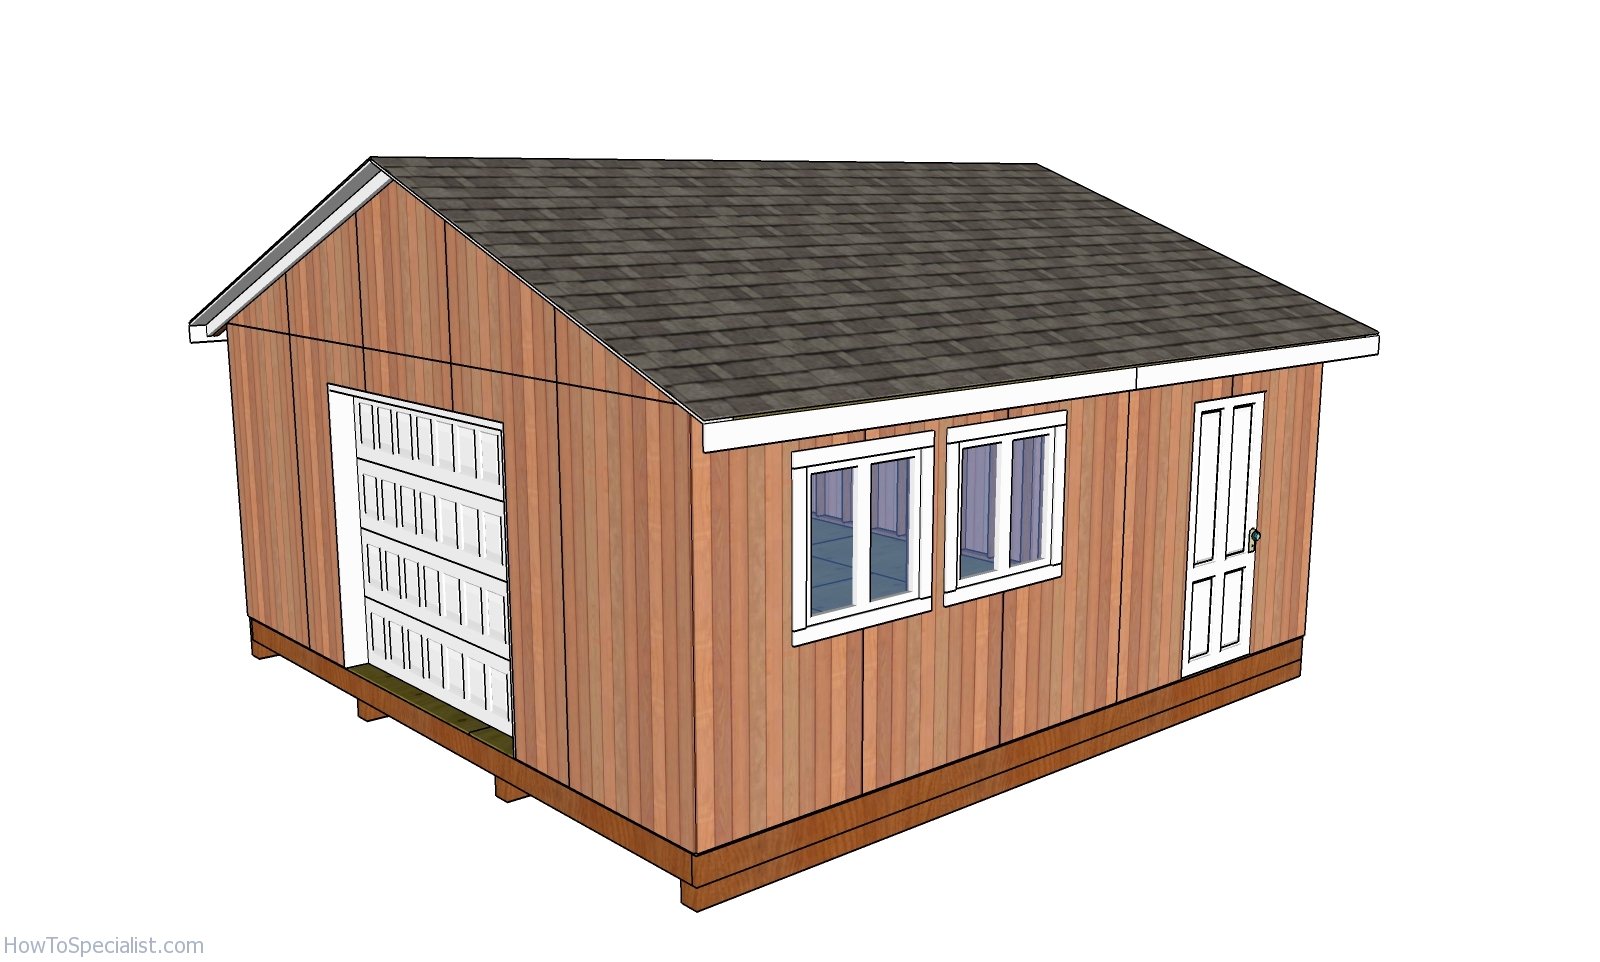 20x20 shed,building a shed,20x20 shed plans,large shed plan...